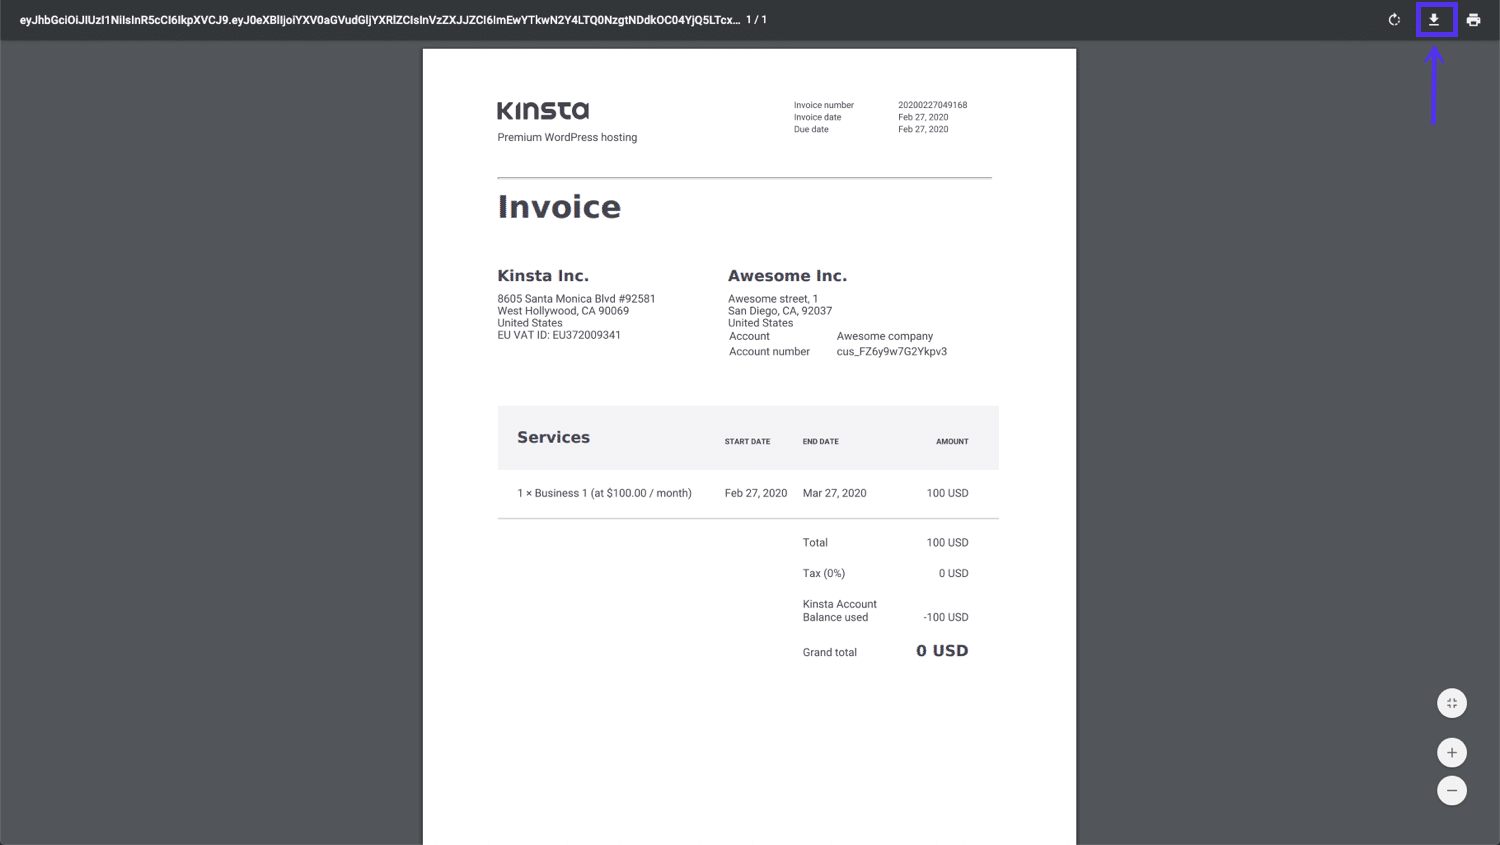 Download your Kinsta invoice as a PDF file from your browser.